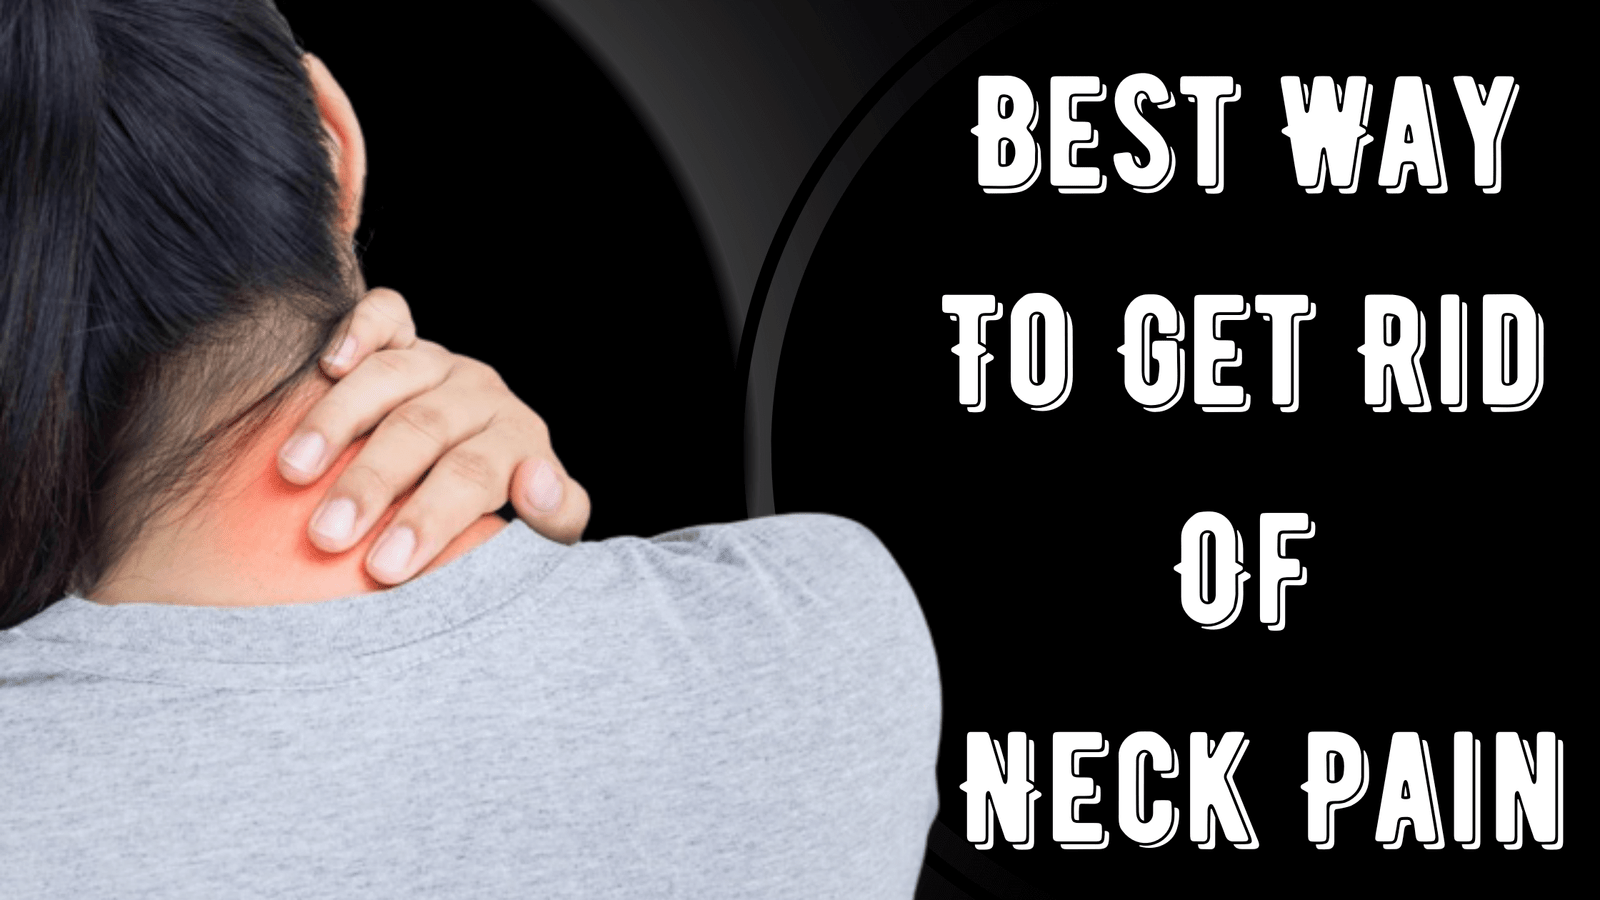 Best Way To Get Rid Of Neck Pain